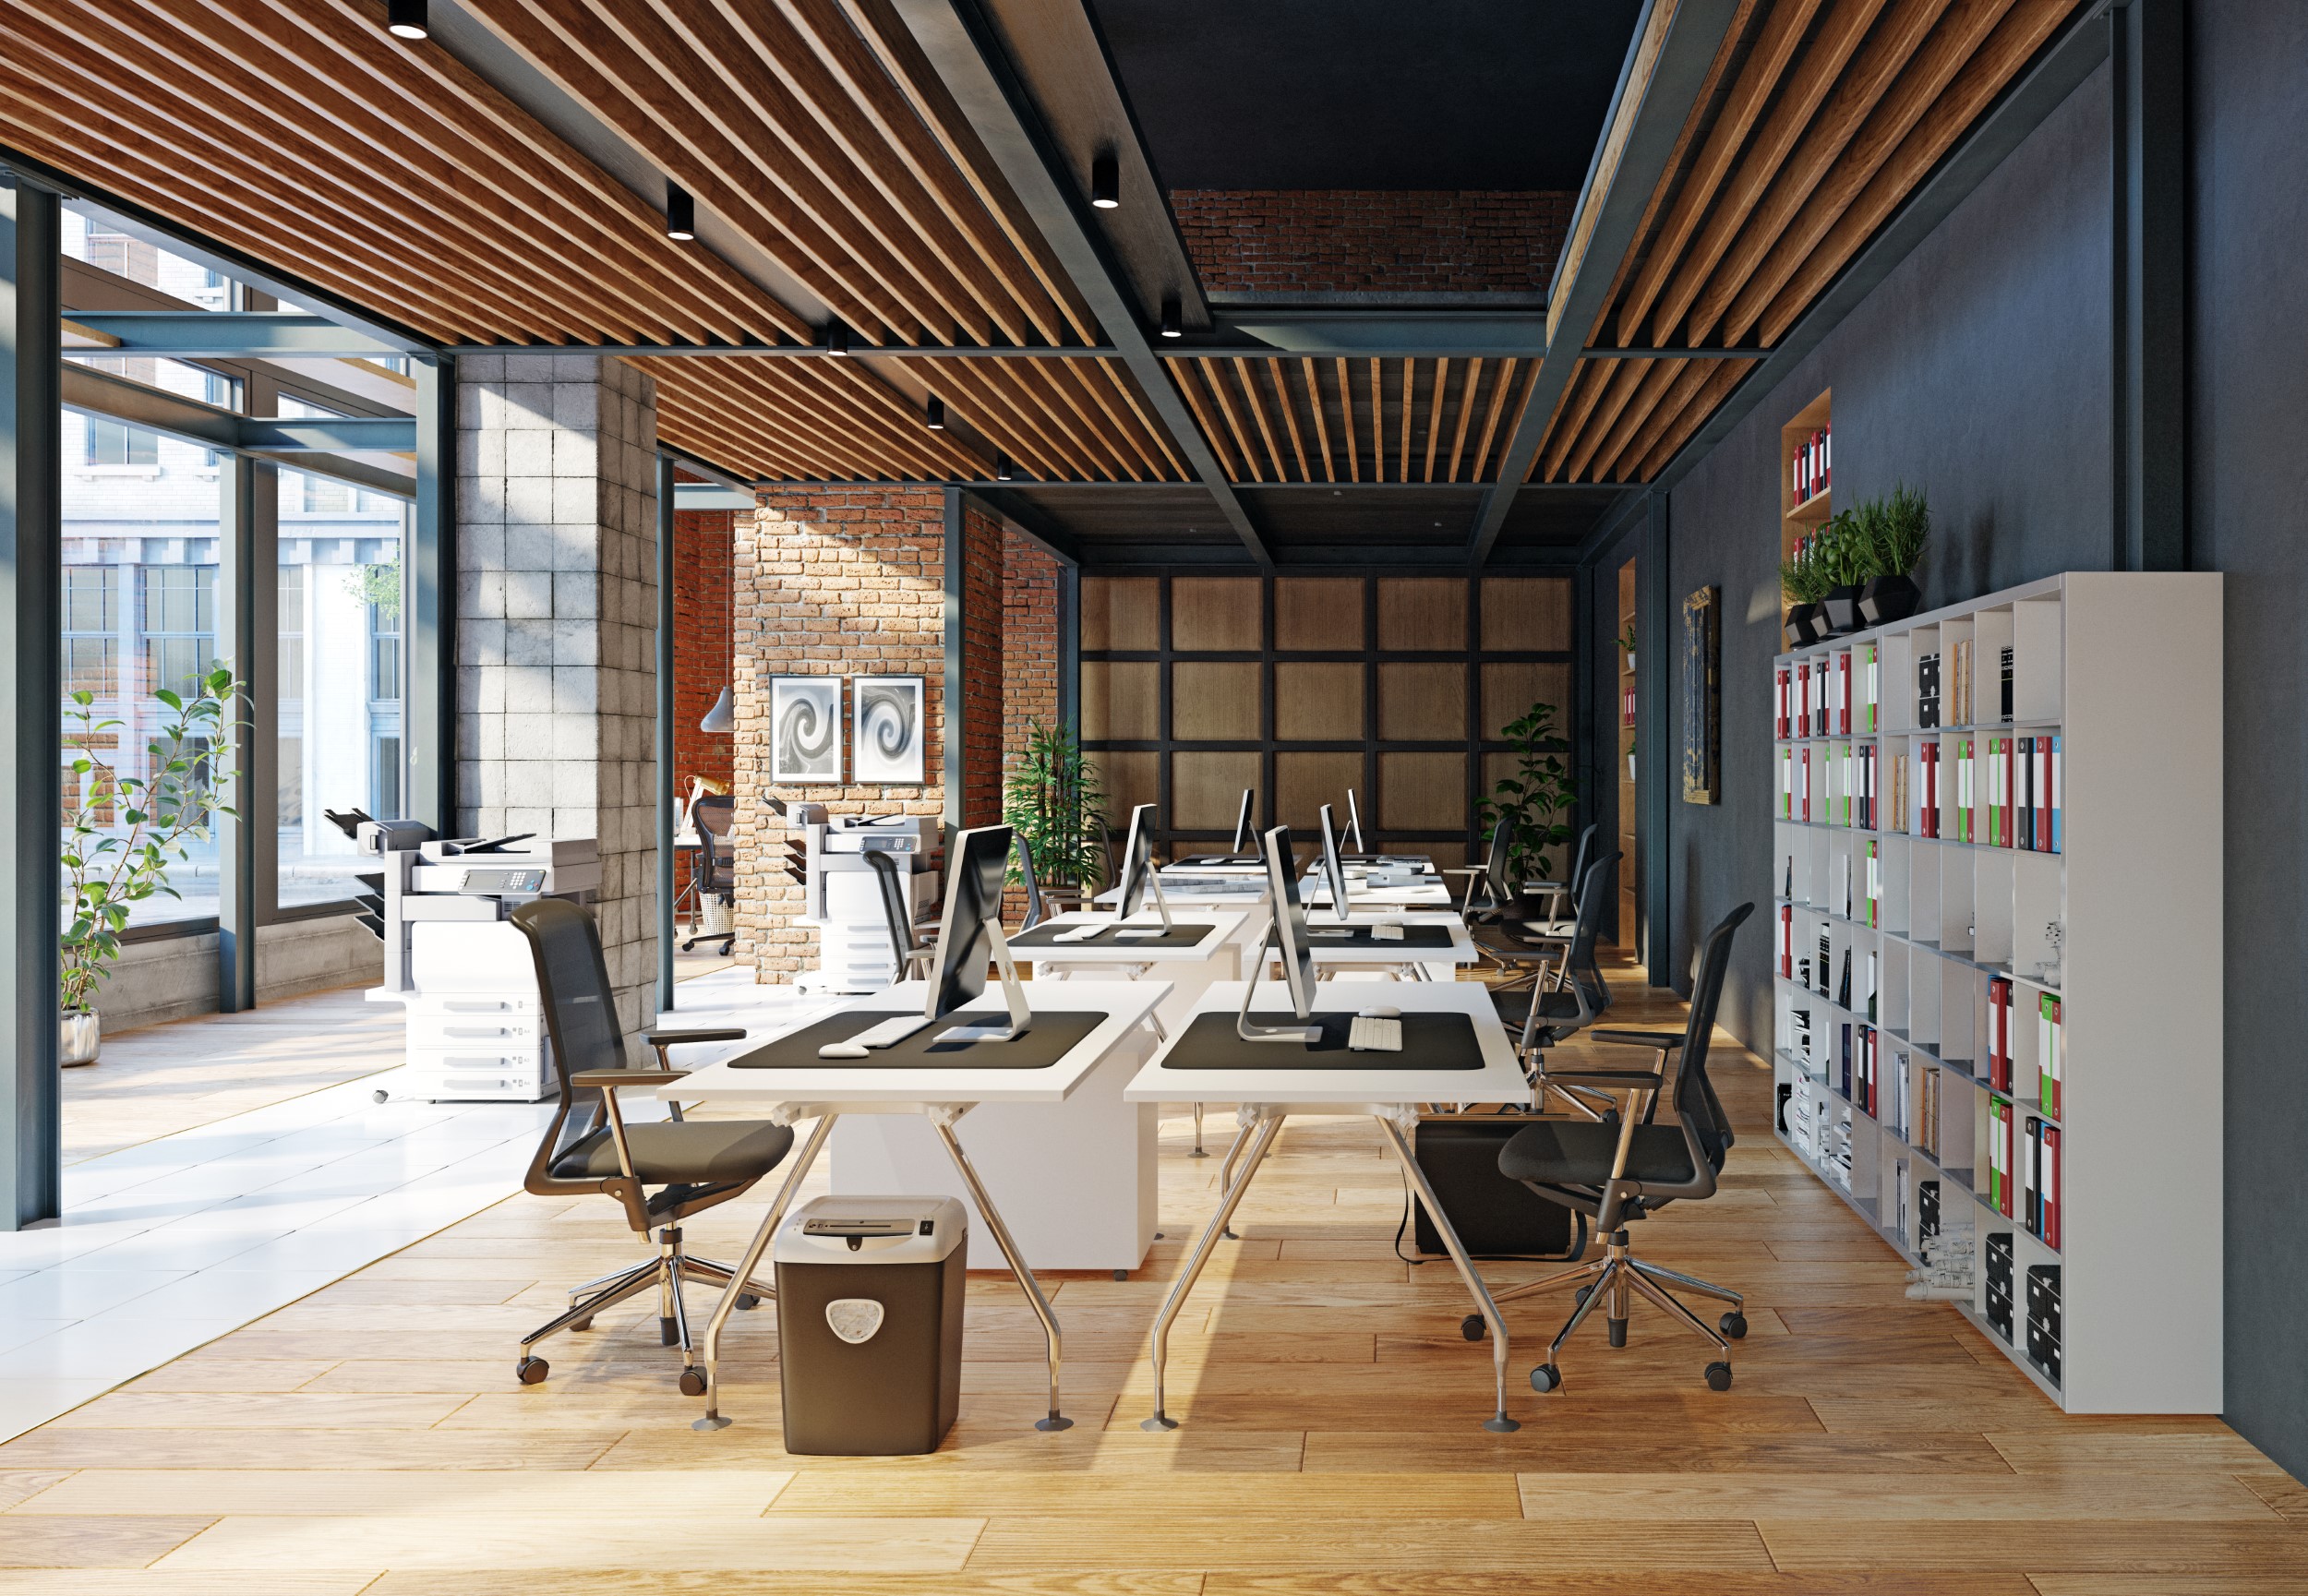 A Furniture Selection Guide For An Open Space Office